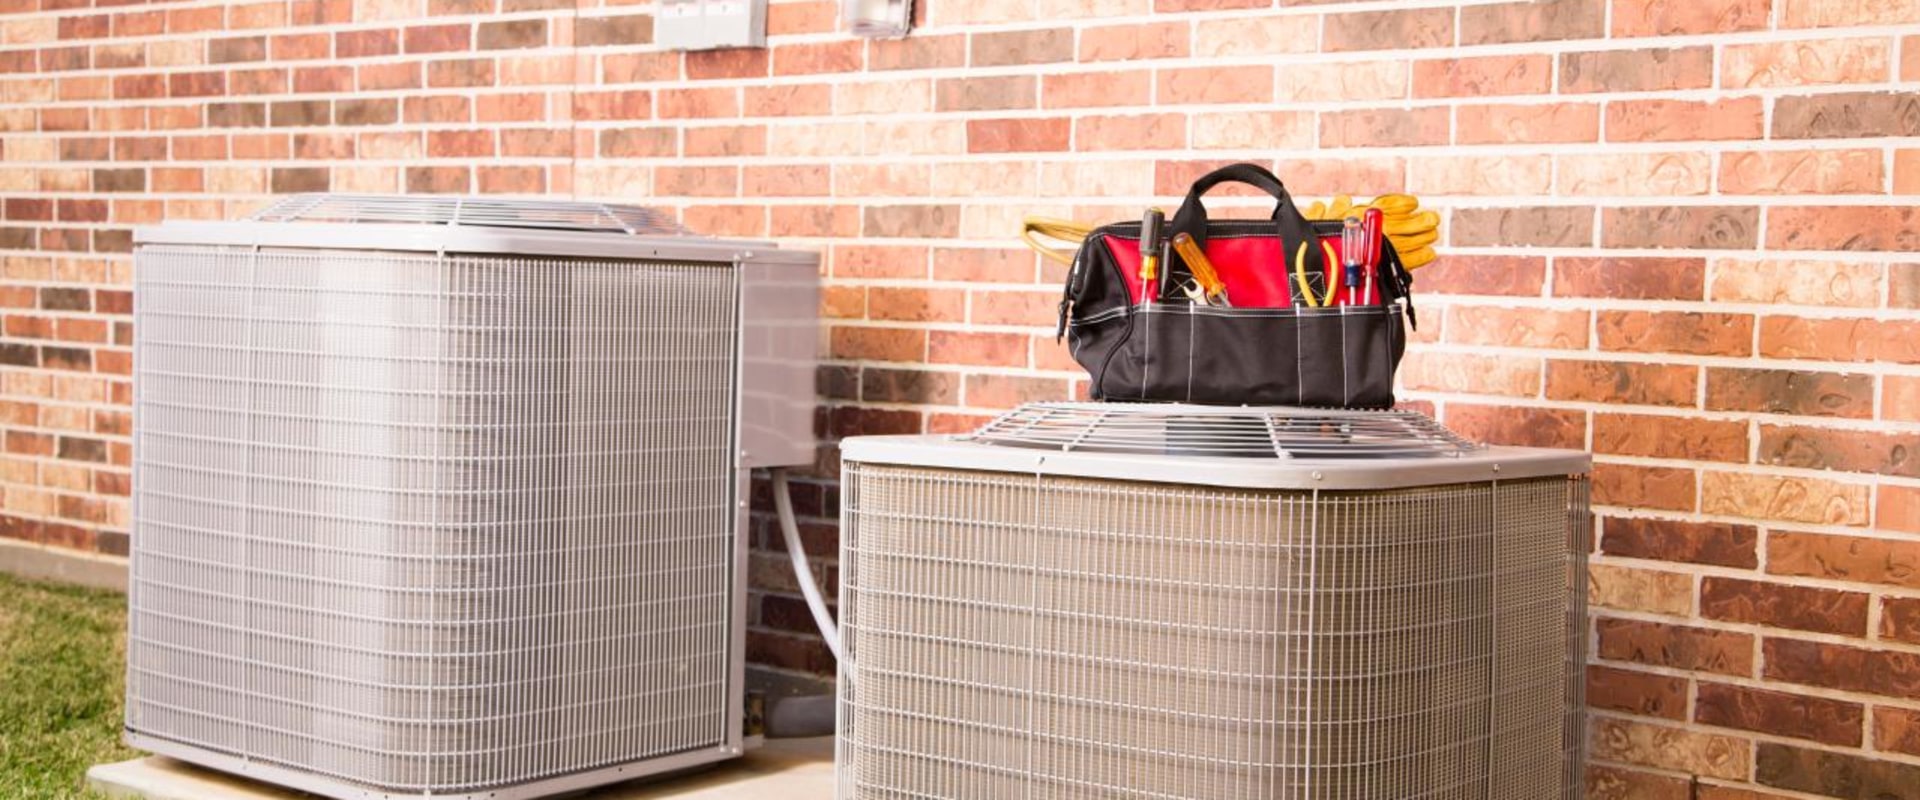 How Often Should You Maintain Your HVAC System for Optimal Performance?